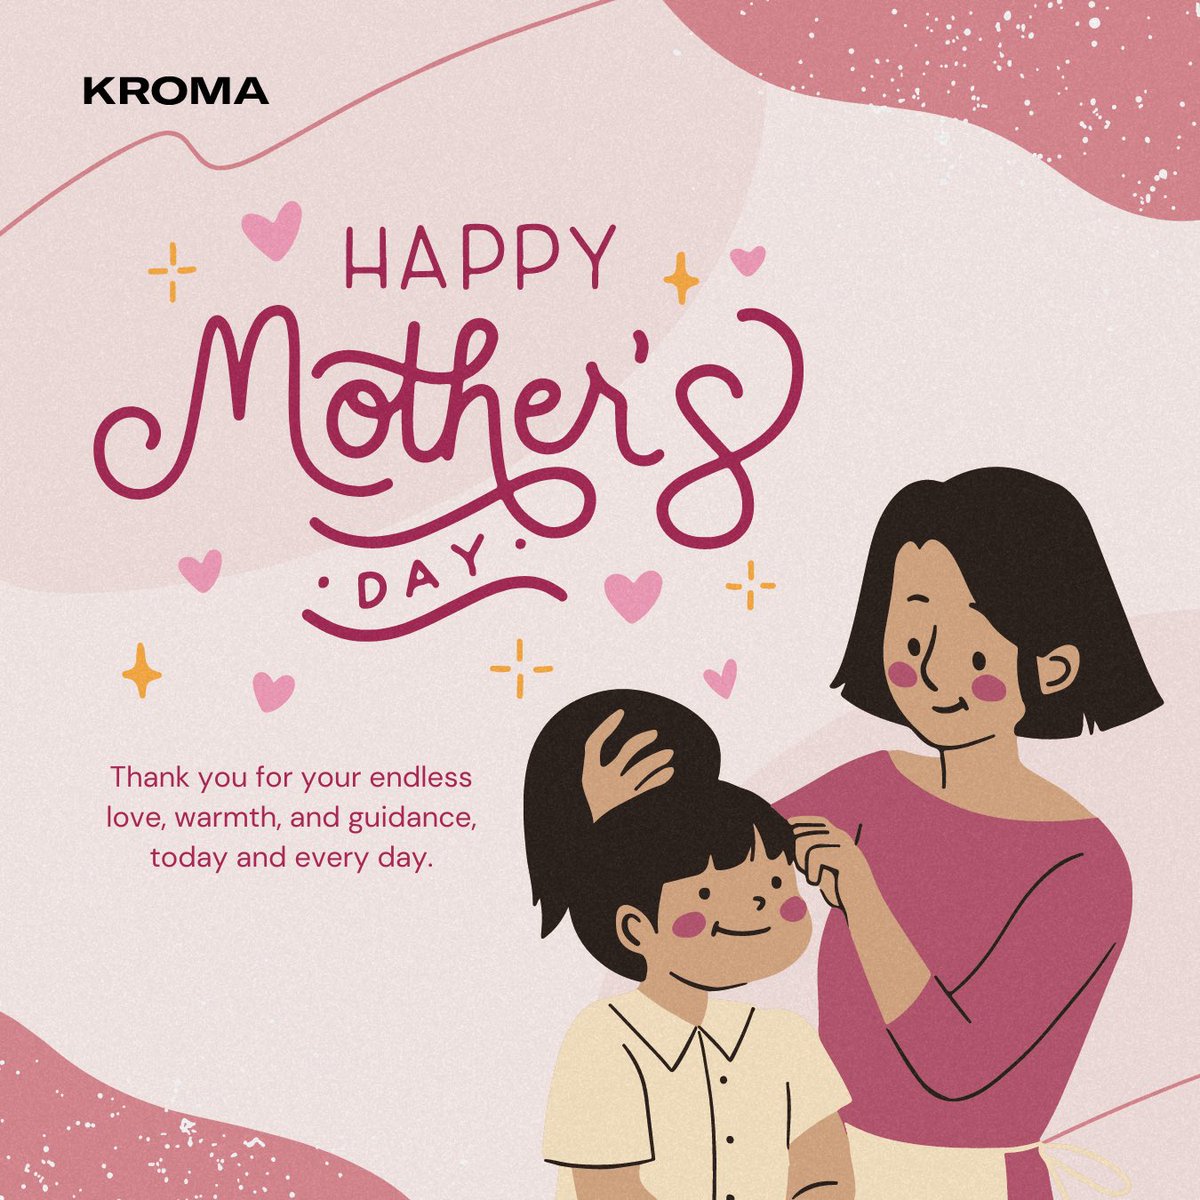 In a world that can feel big and scary, your love provides unwavering protection, comfort, and support. Thank you for always being our guiding light. Happy Mother’s Day!